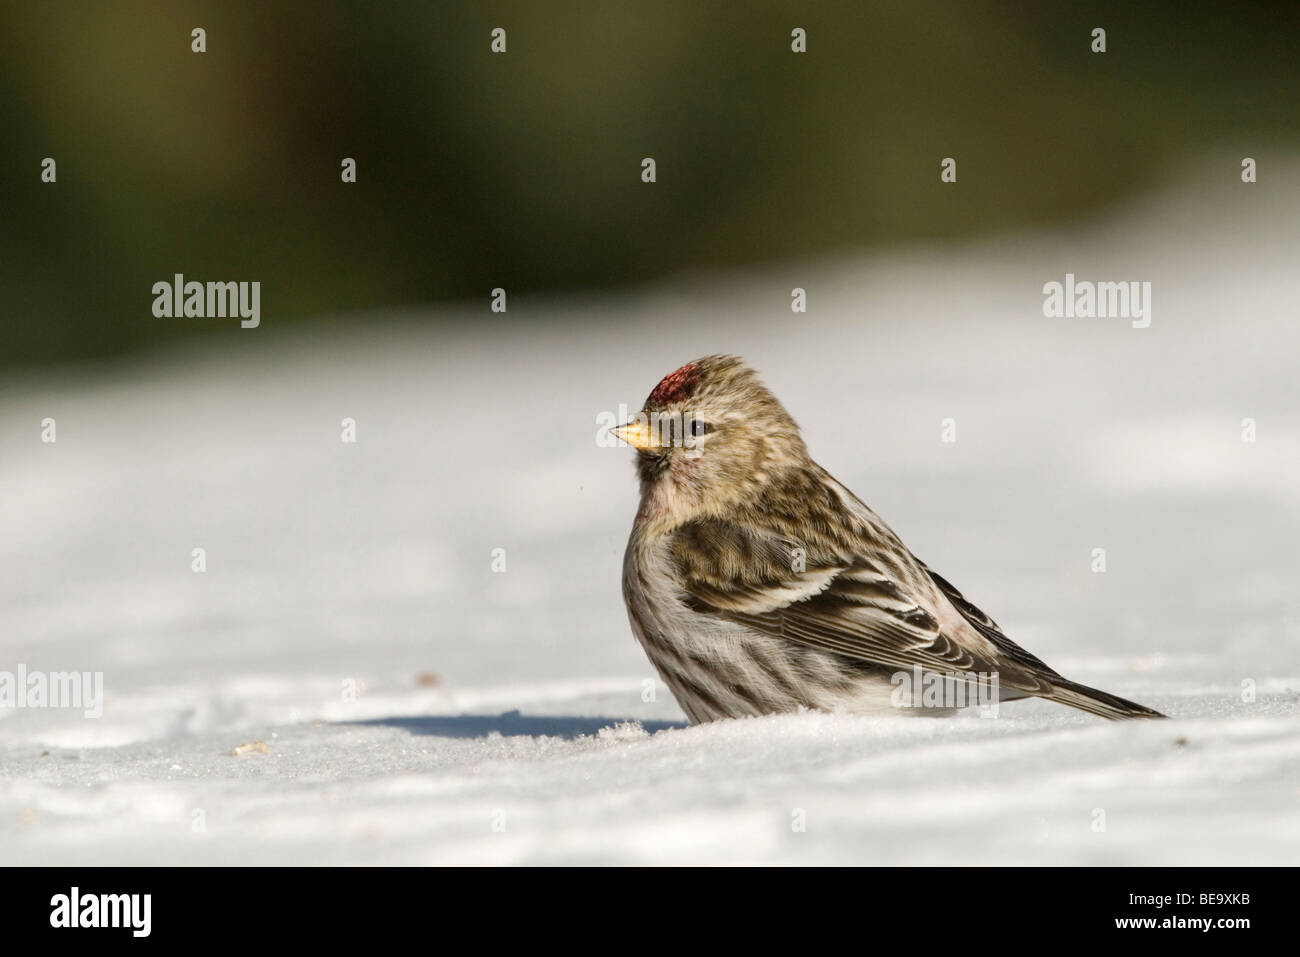 Een Grote Barmsijs zittend in de sneeuw,A Mealy Redpoll sitting in the snow. Stock Photo